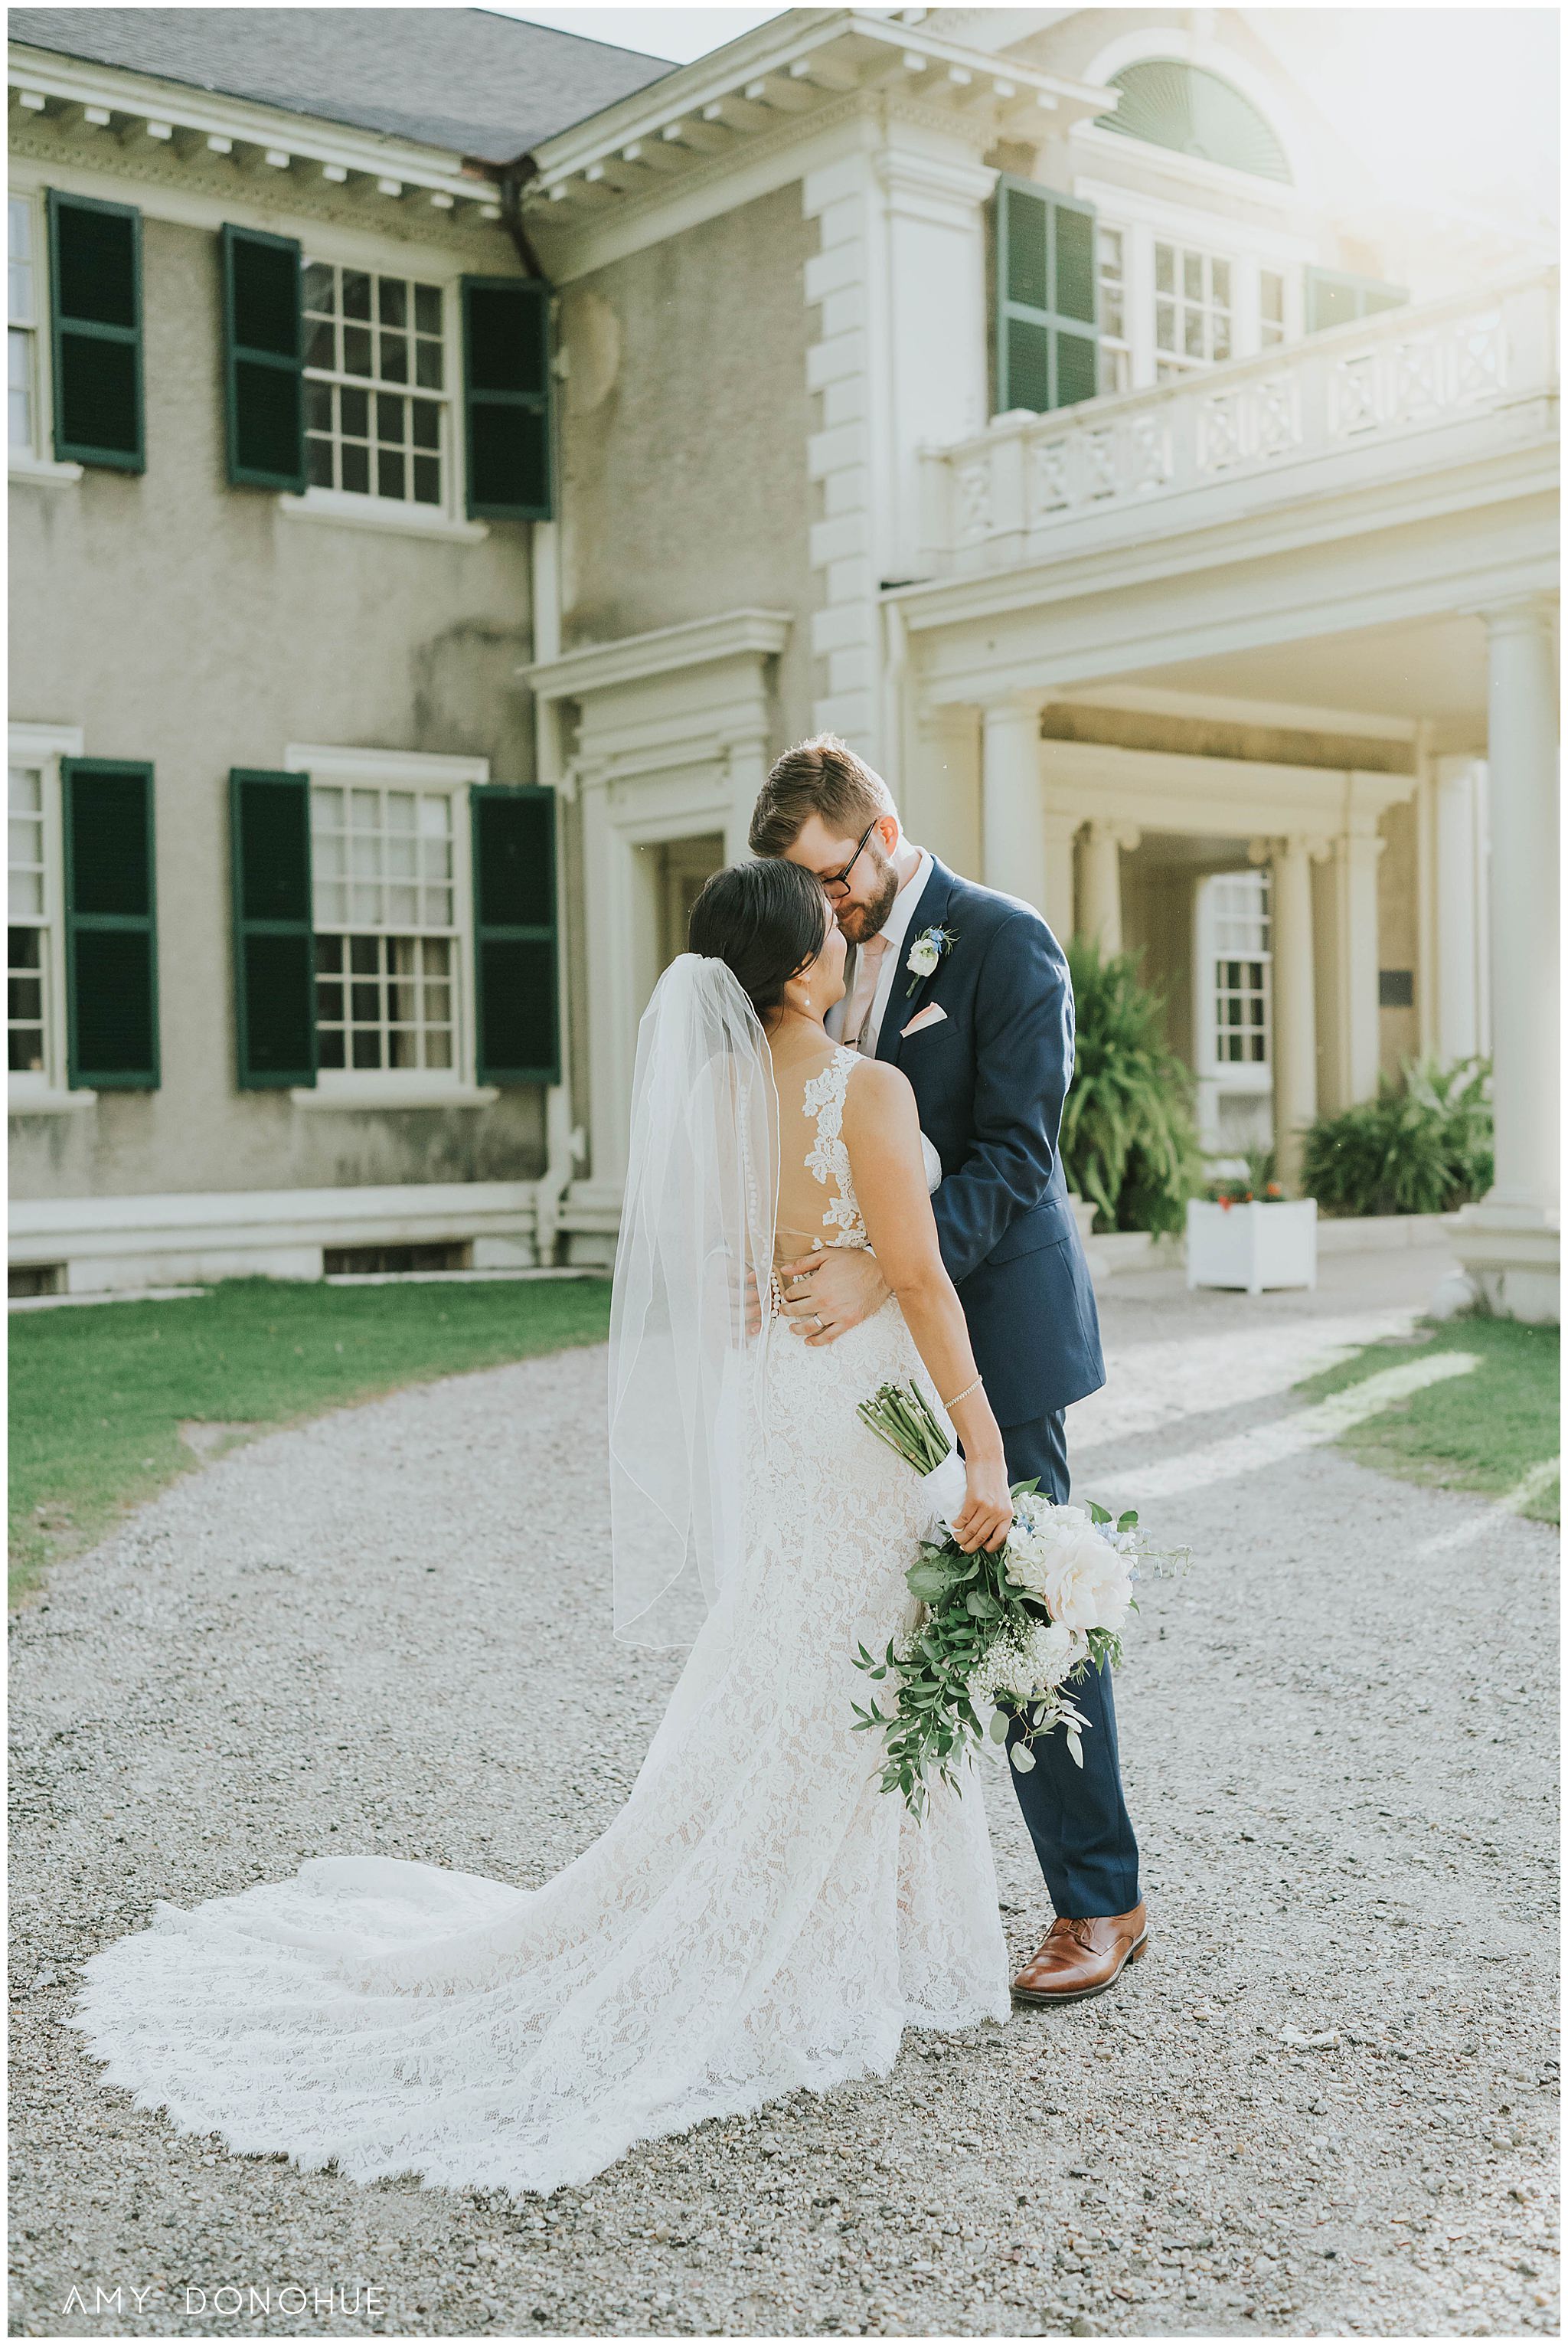 Romantic Bride and Groom portraits in beautiful light at The Hildene in Manchester, Vermont